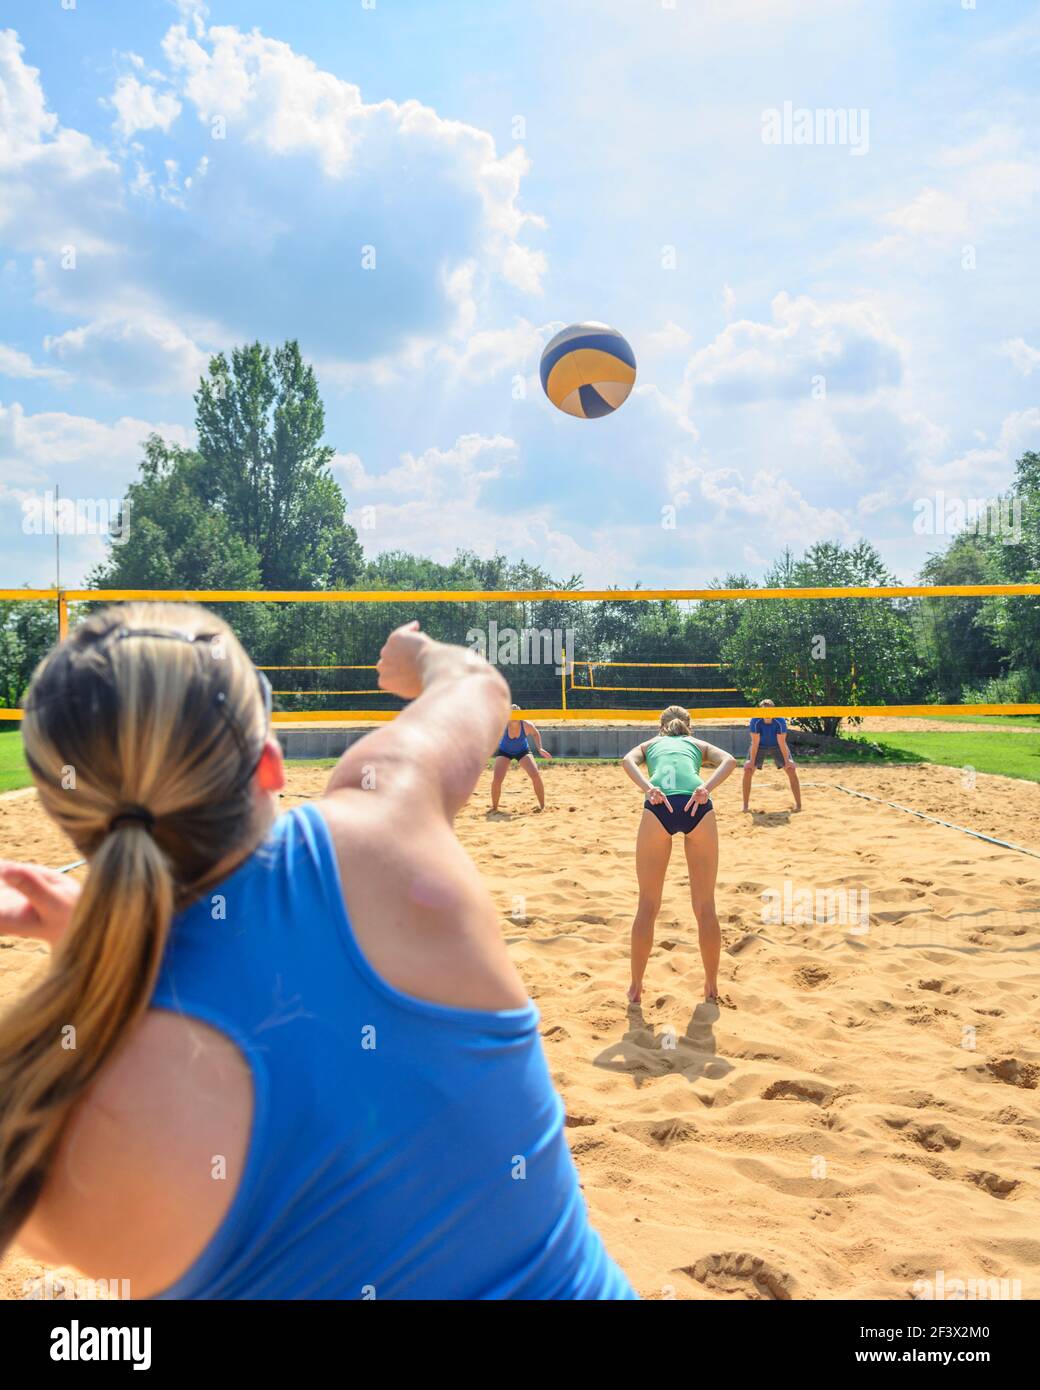 Trendy summer sport - young people playing Beachvolleyball Stock Photo